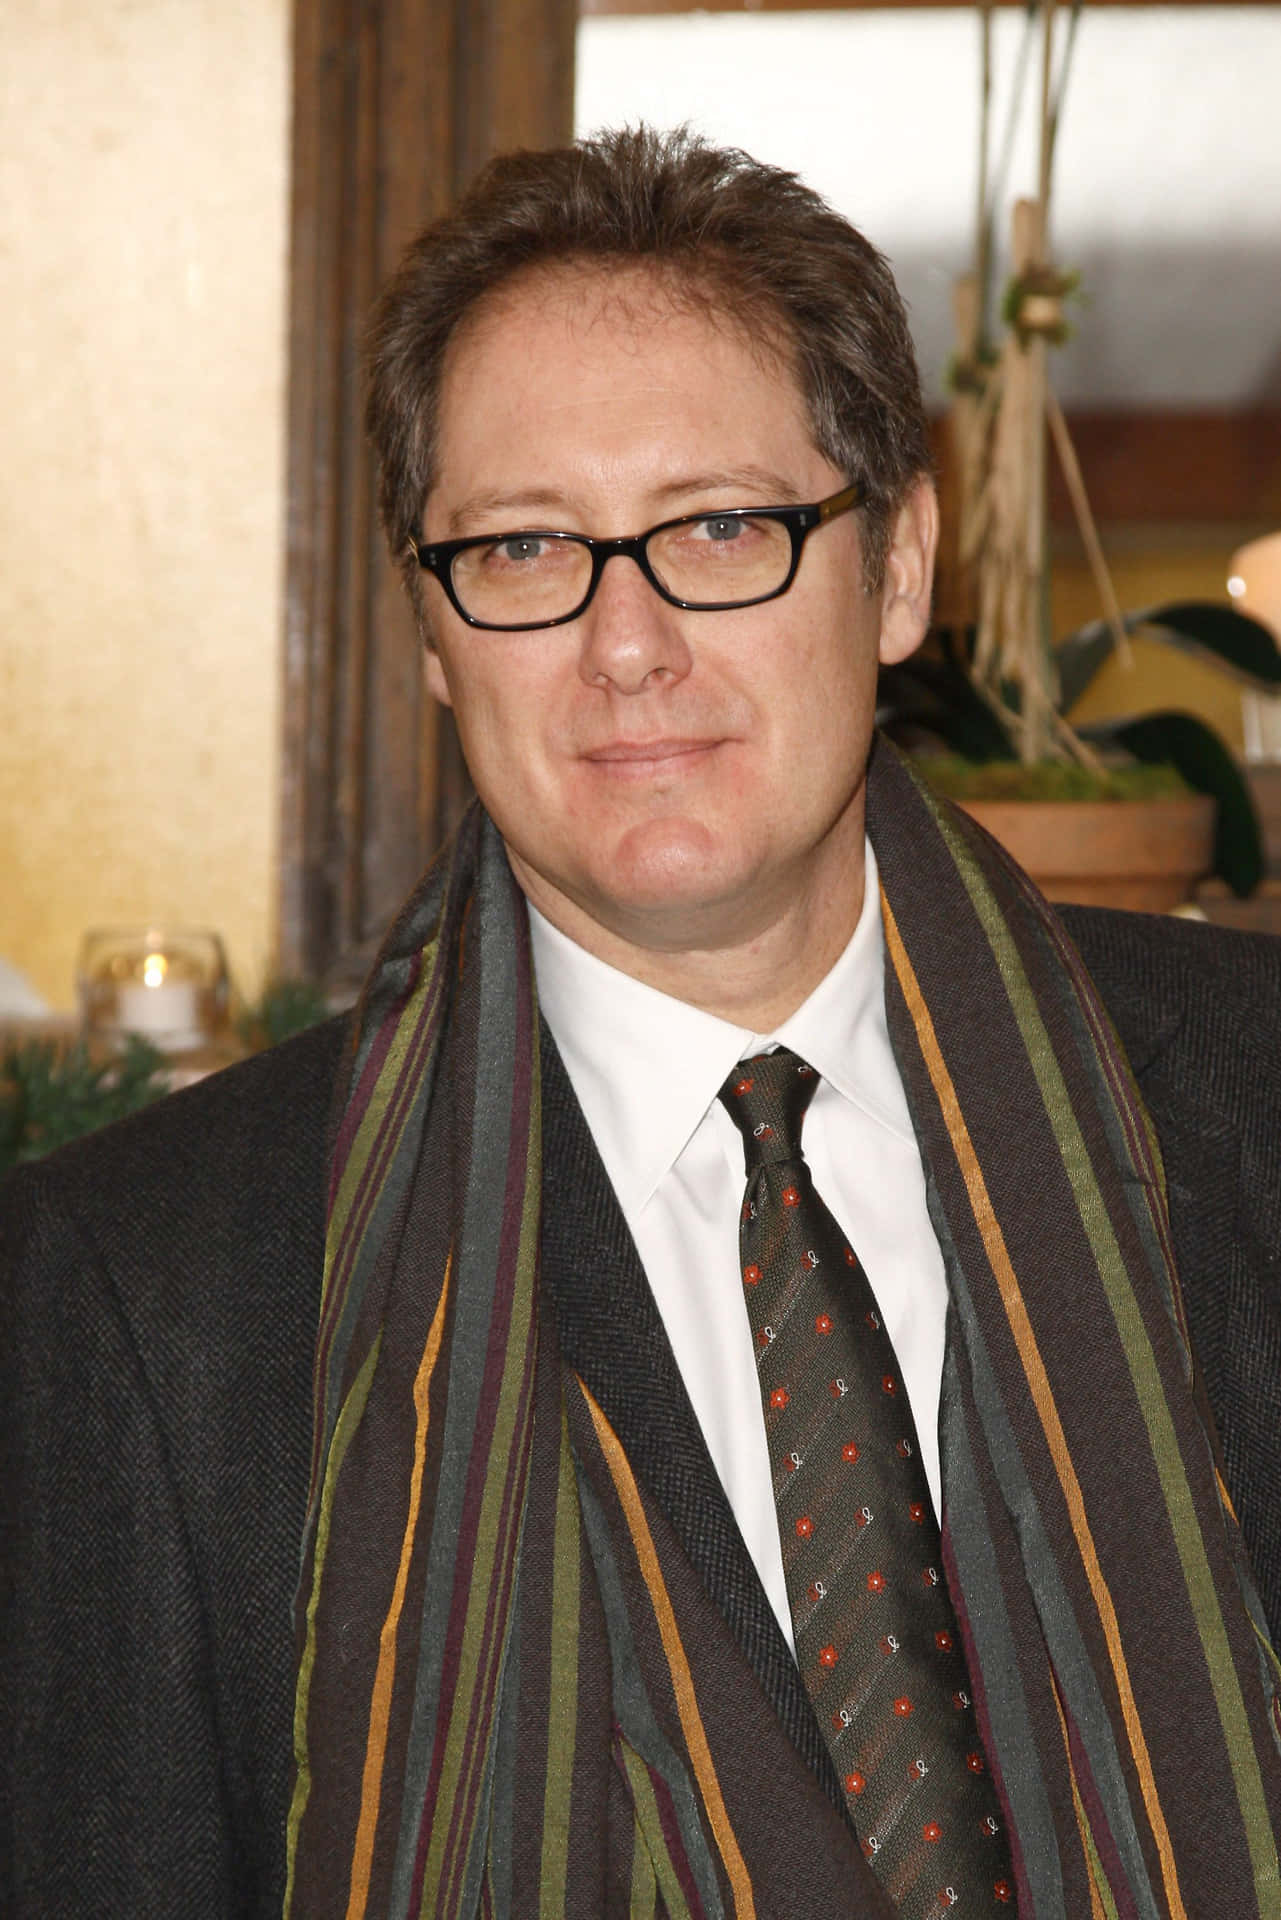 Caption: Acclaimed actor James Spader in a charming black and white portrait. Wallpaper